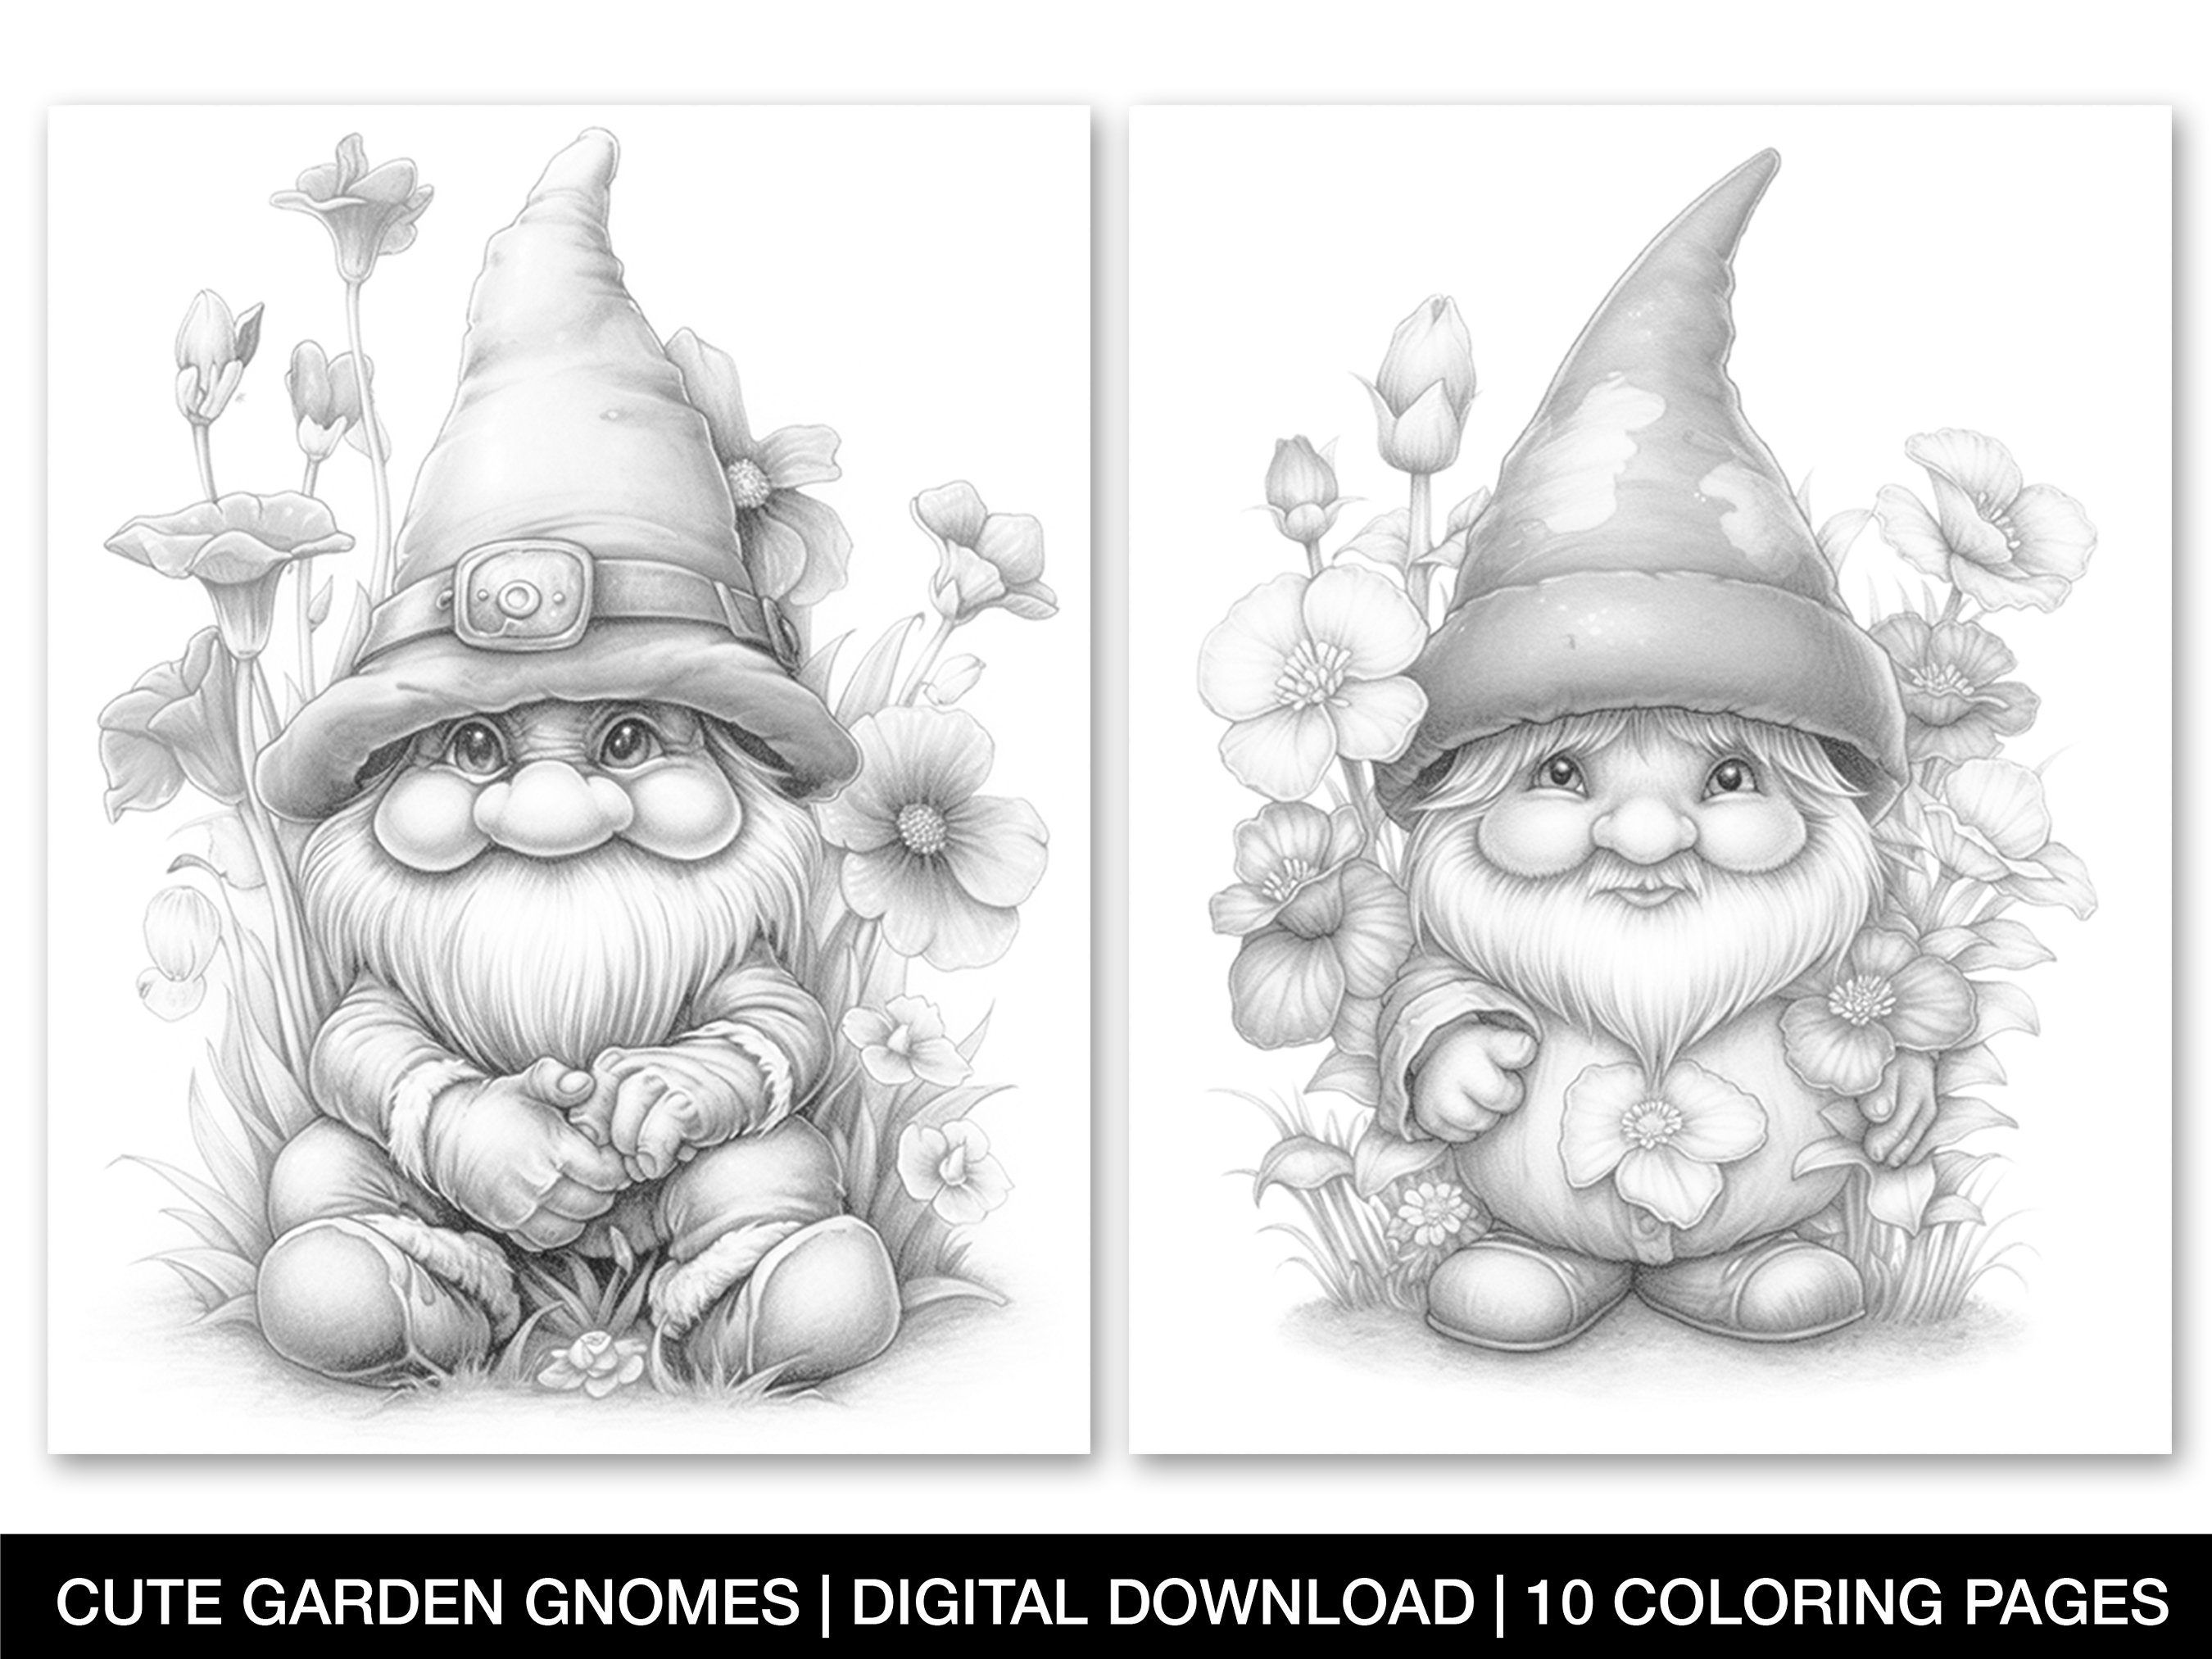 Gnome coloring pages for adults and kids printable cute gnomes cute garden gnome grayscale coloring sheets sweet gnomes instant download instant download